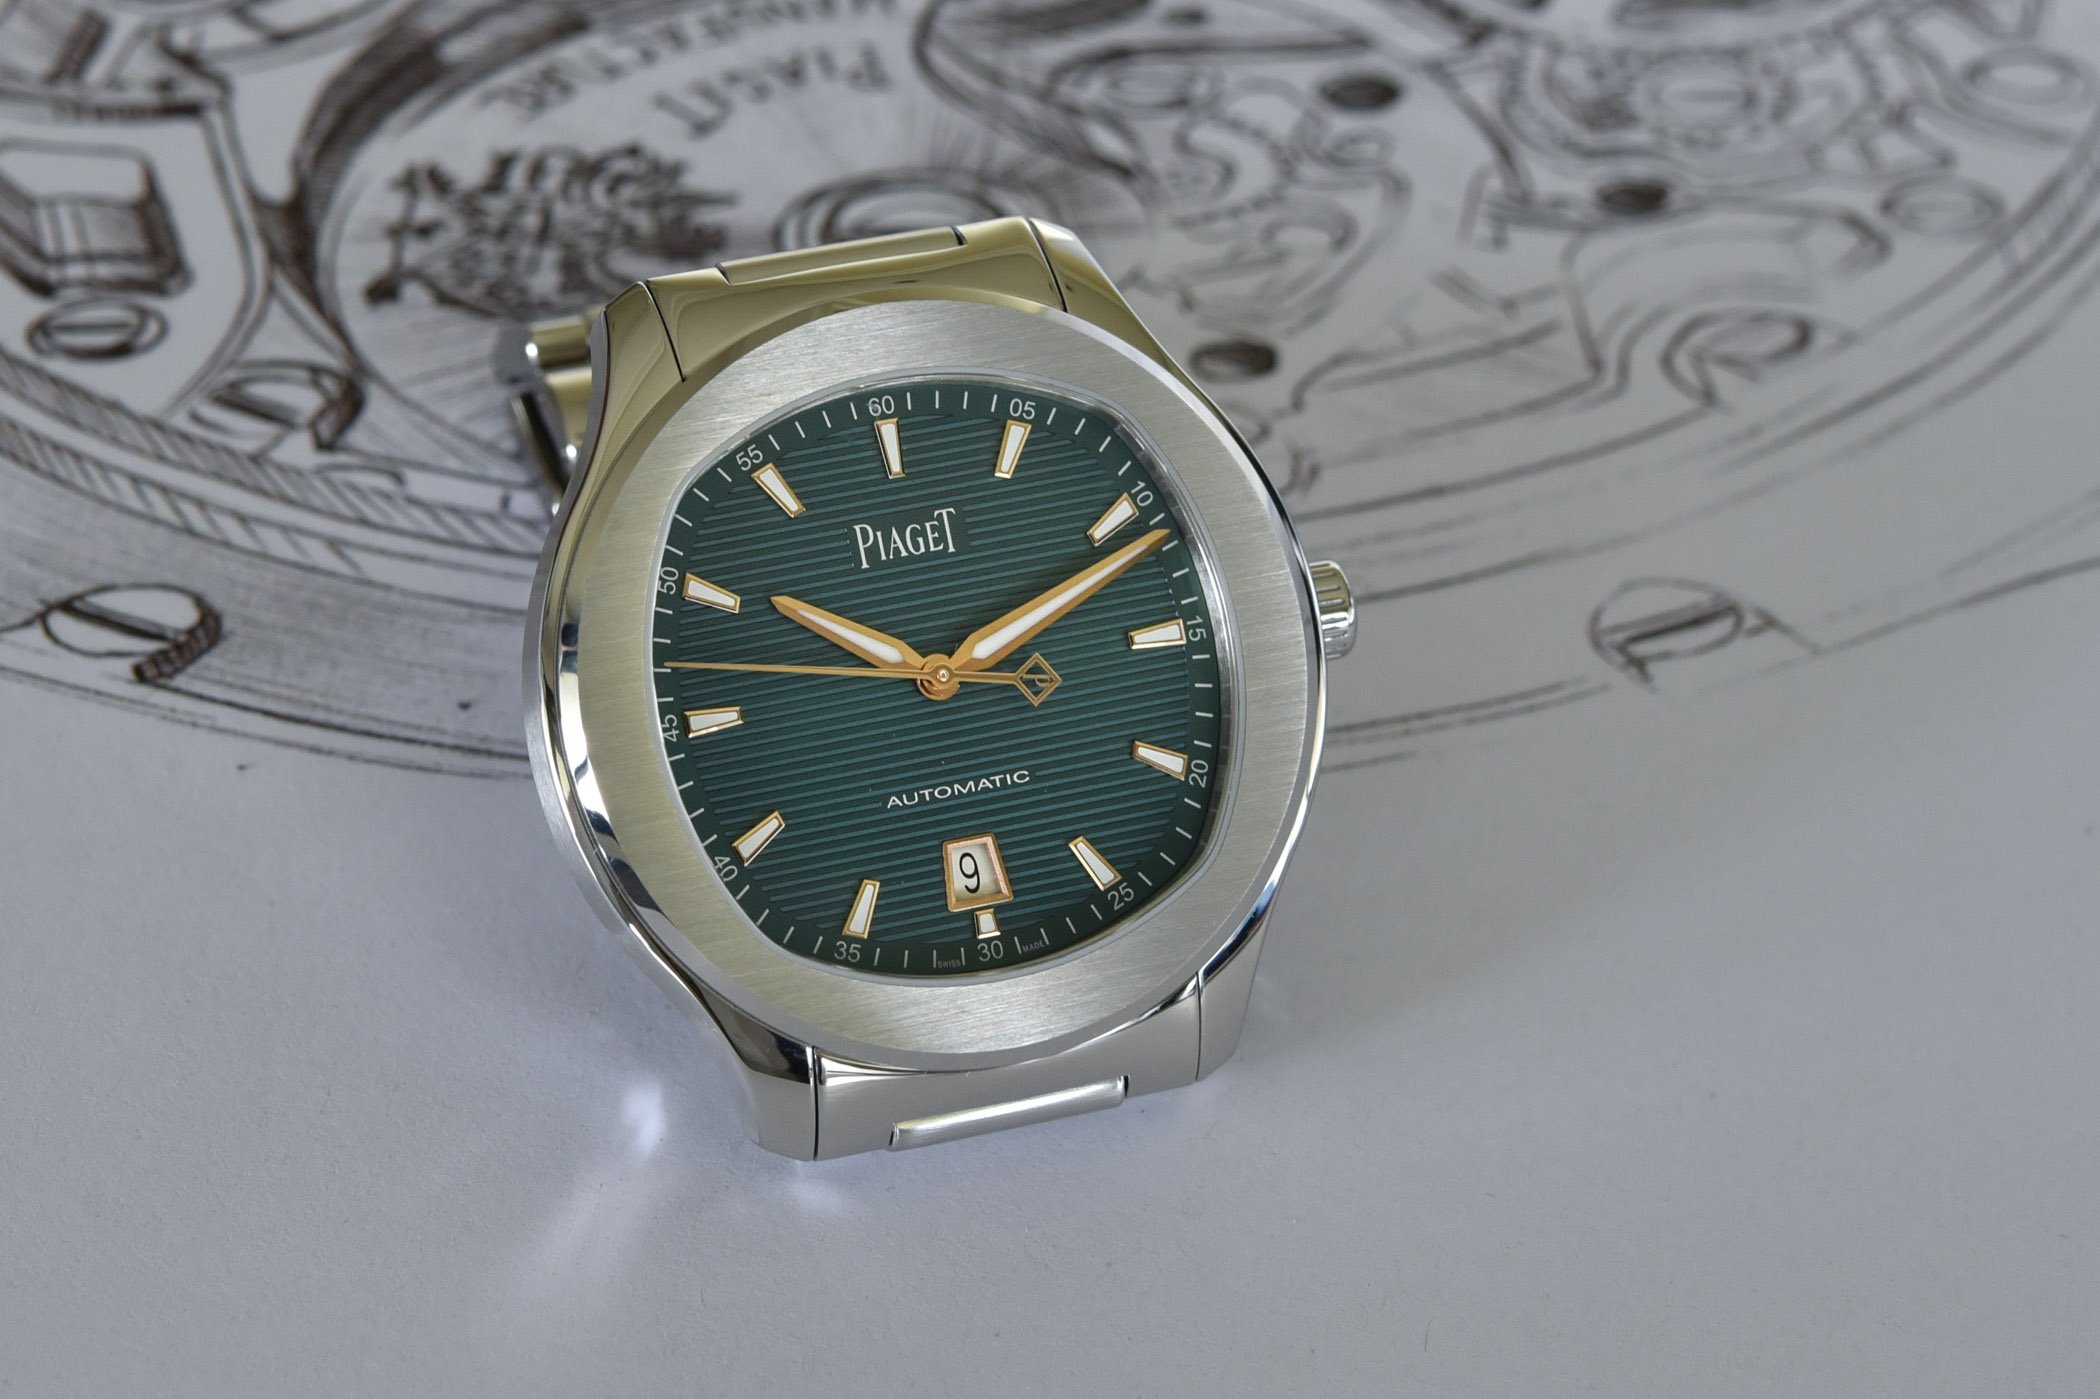 Piaget Polo S Automatic Green-and-Gold Limited Edition